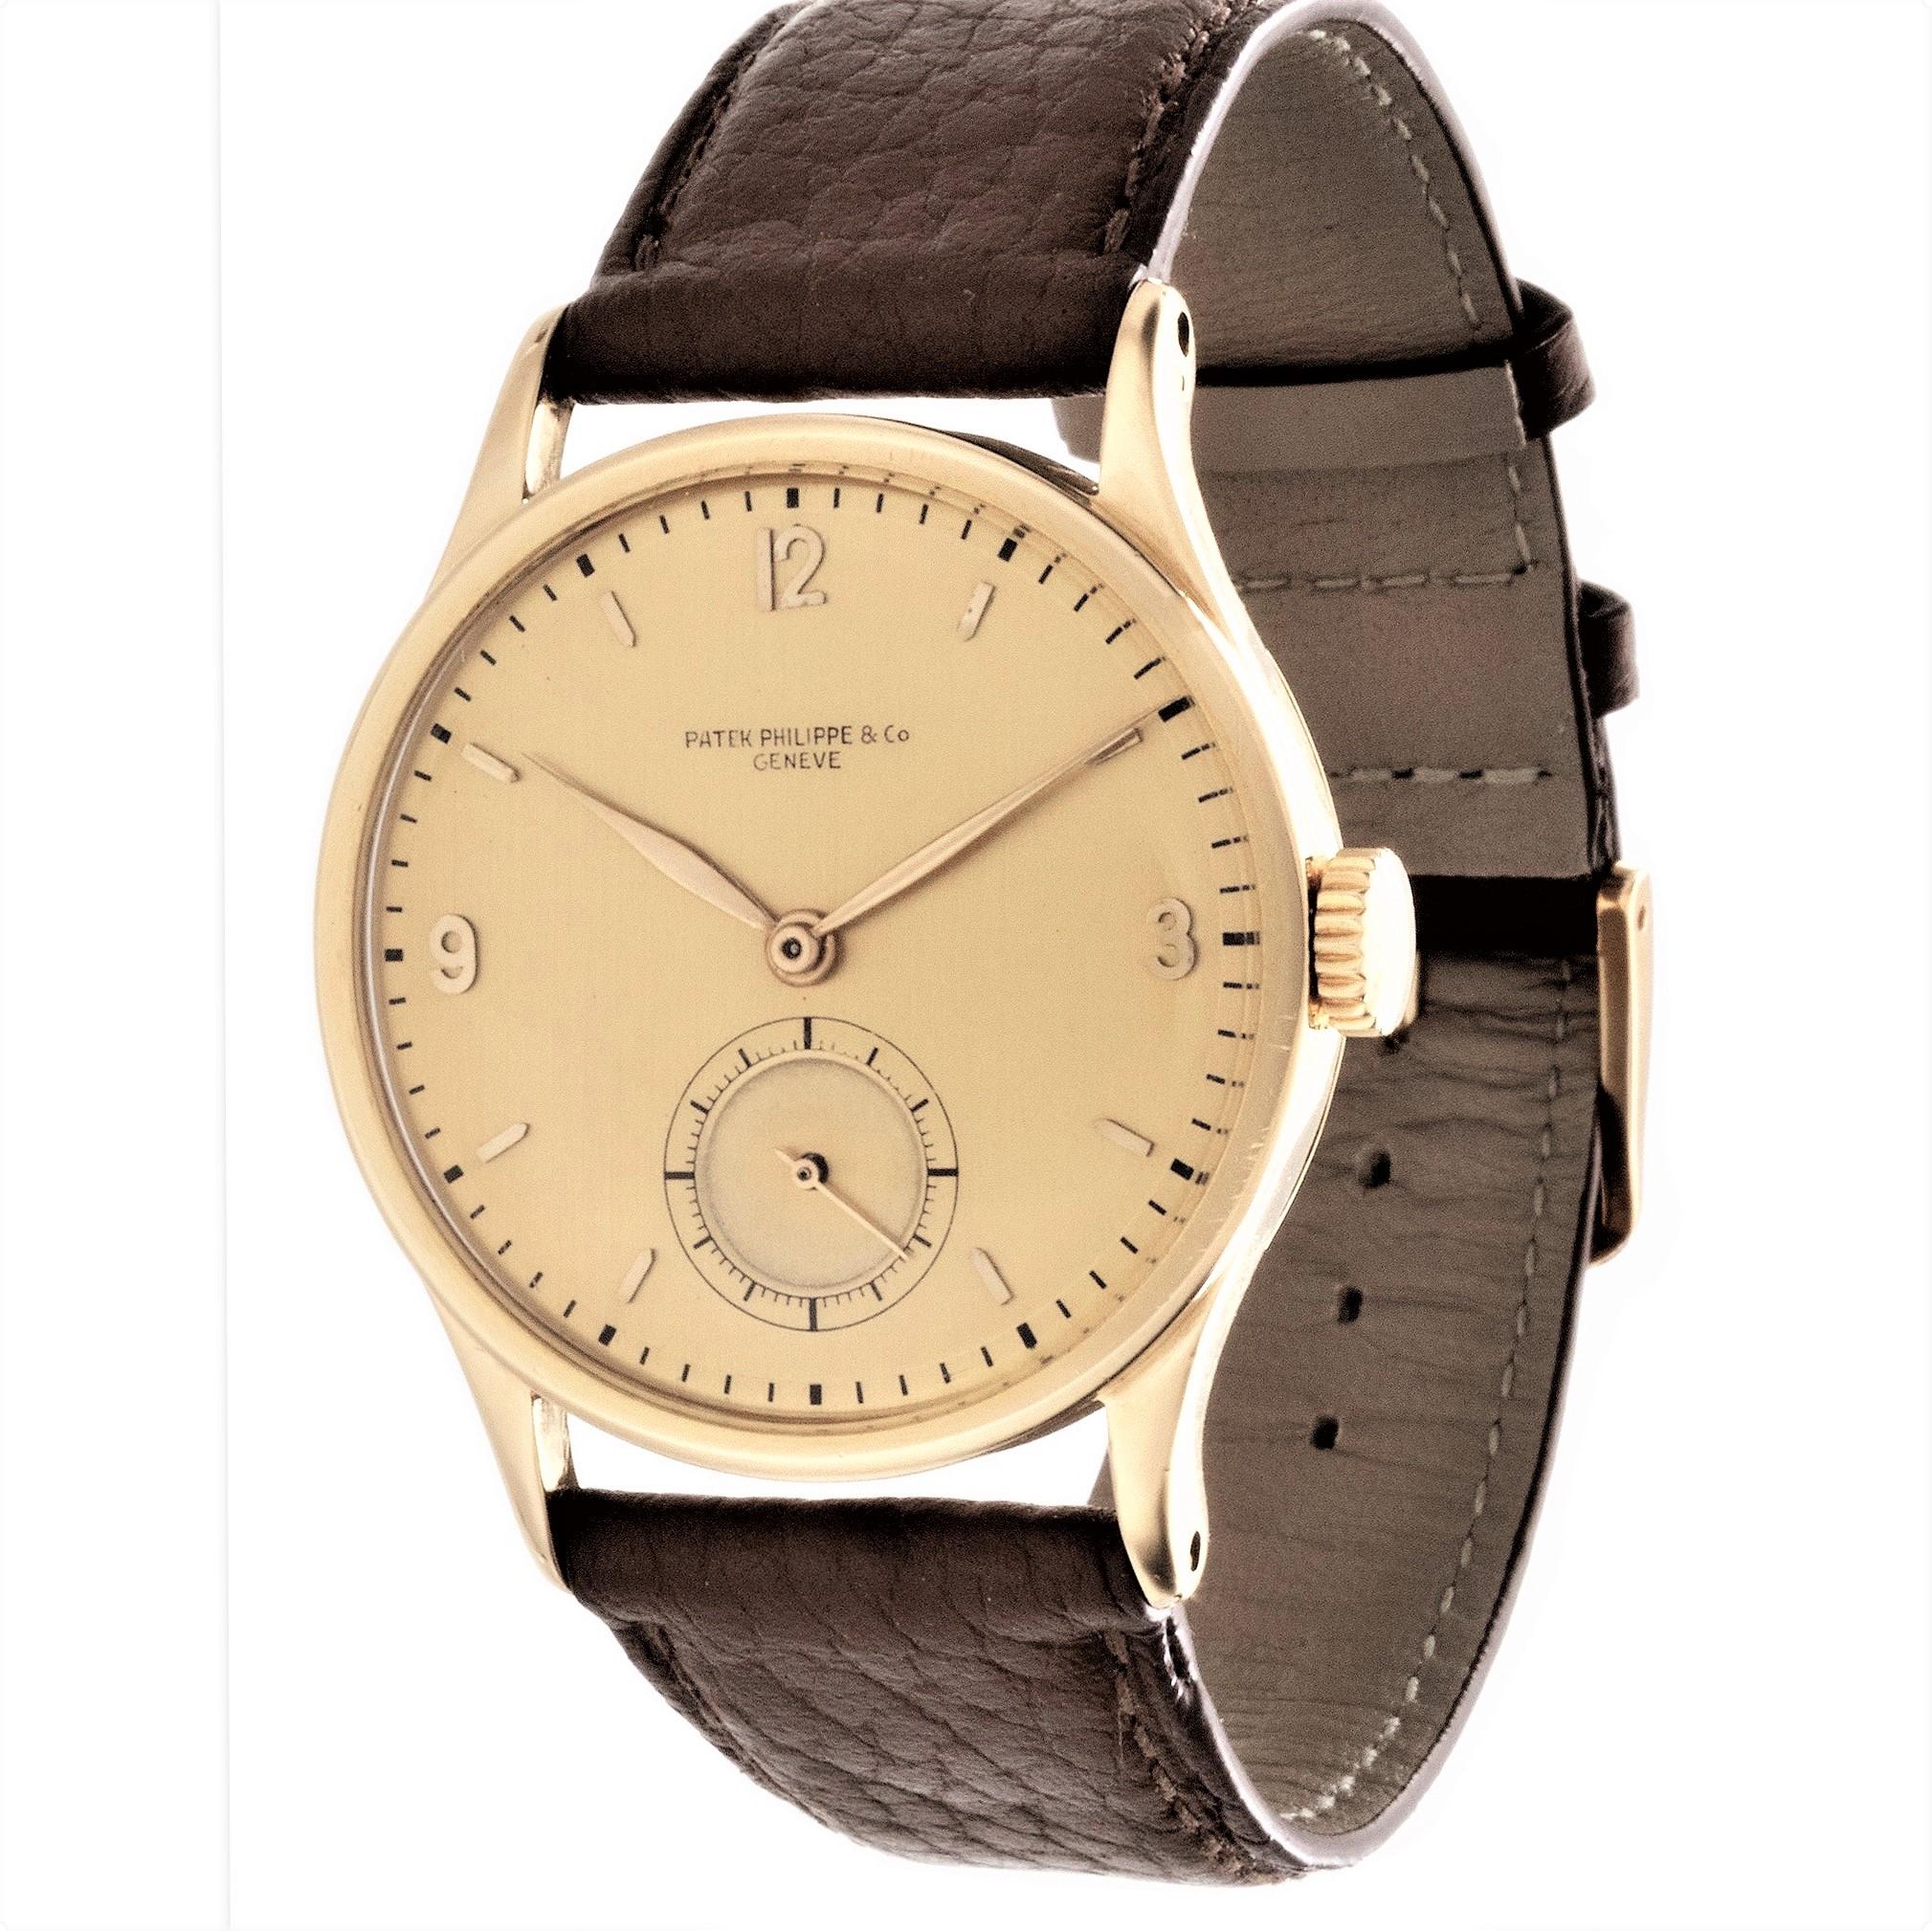 Introduction:
This 570J Calatrava Patek Philippe watch features a manual winding 12